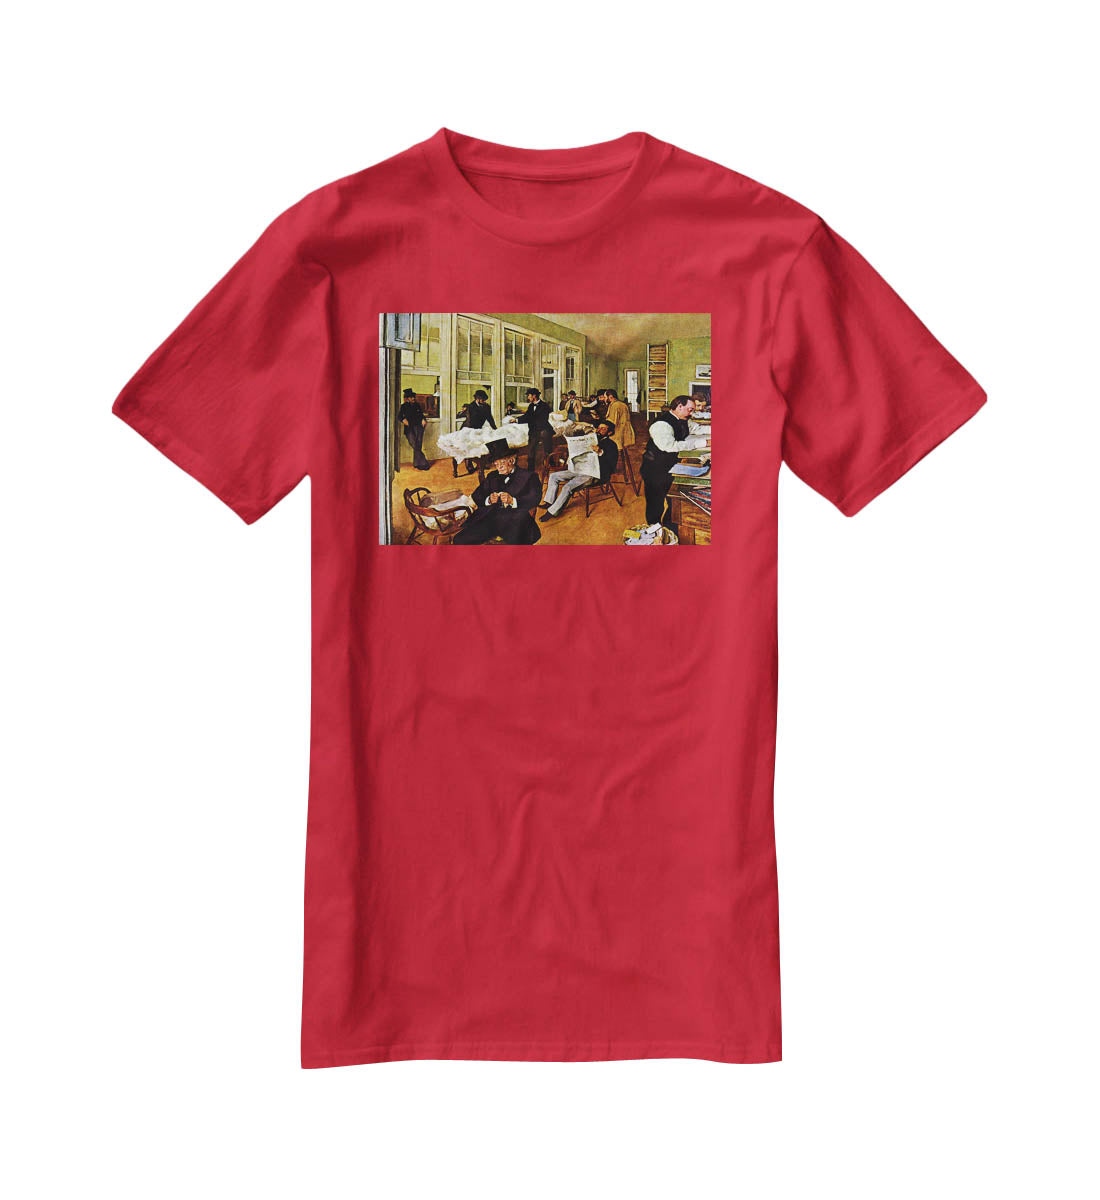 The cotton office in New Orleans by Degas T-Shirt - Canvas Art Rocks - 4